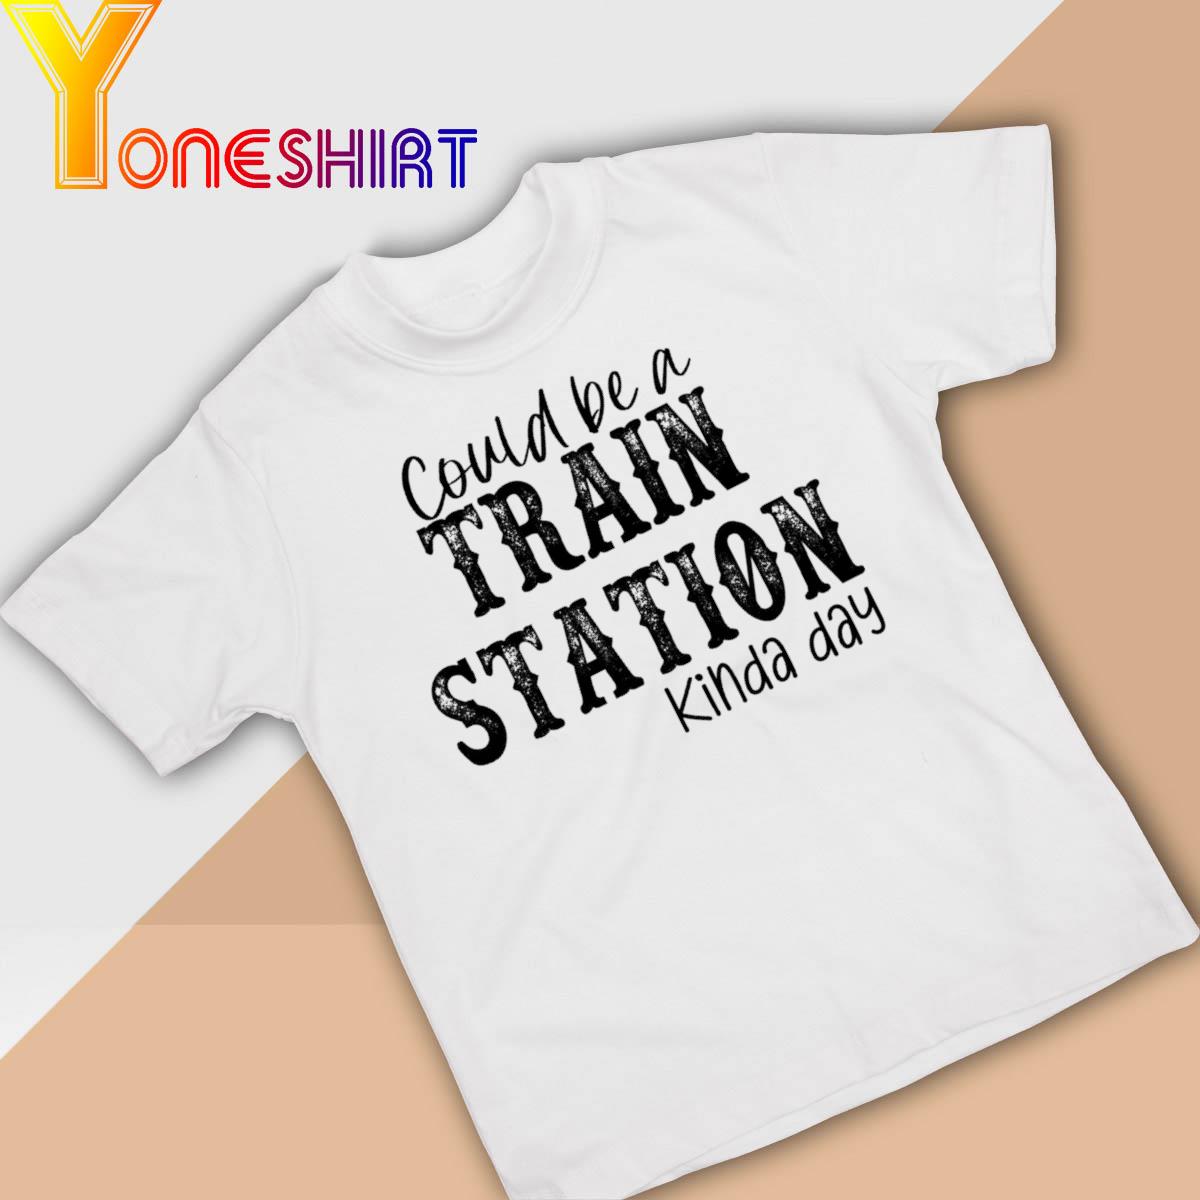 Could be a Train Station Kinda day 2022 shirt